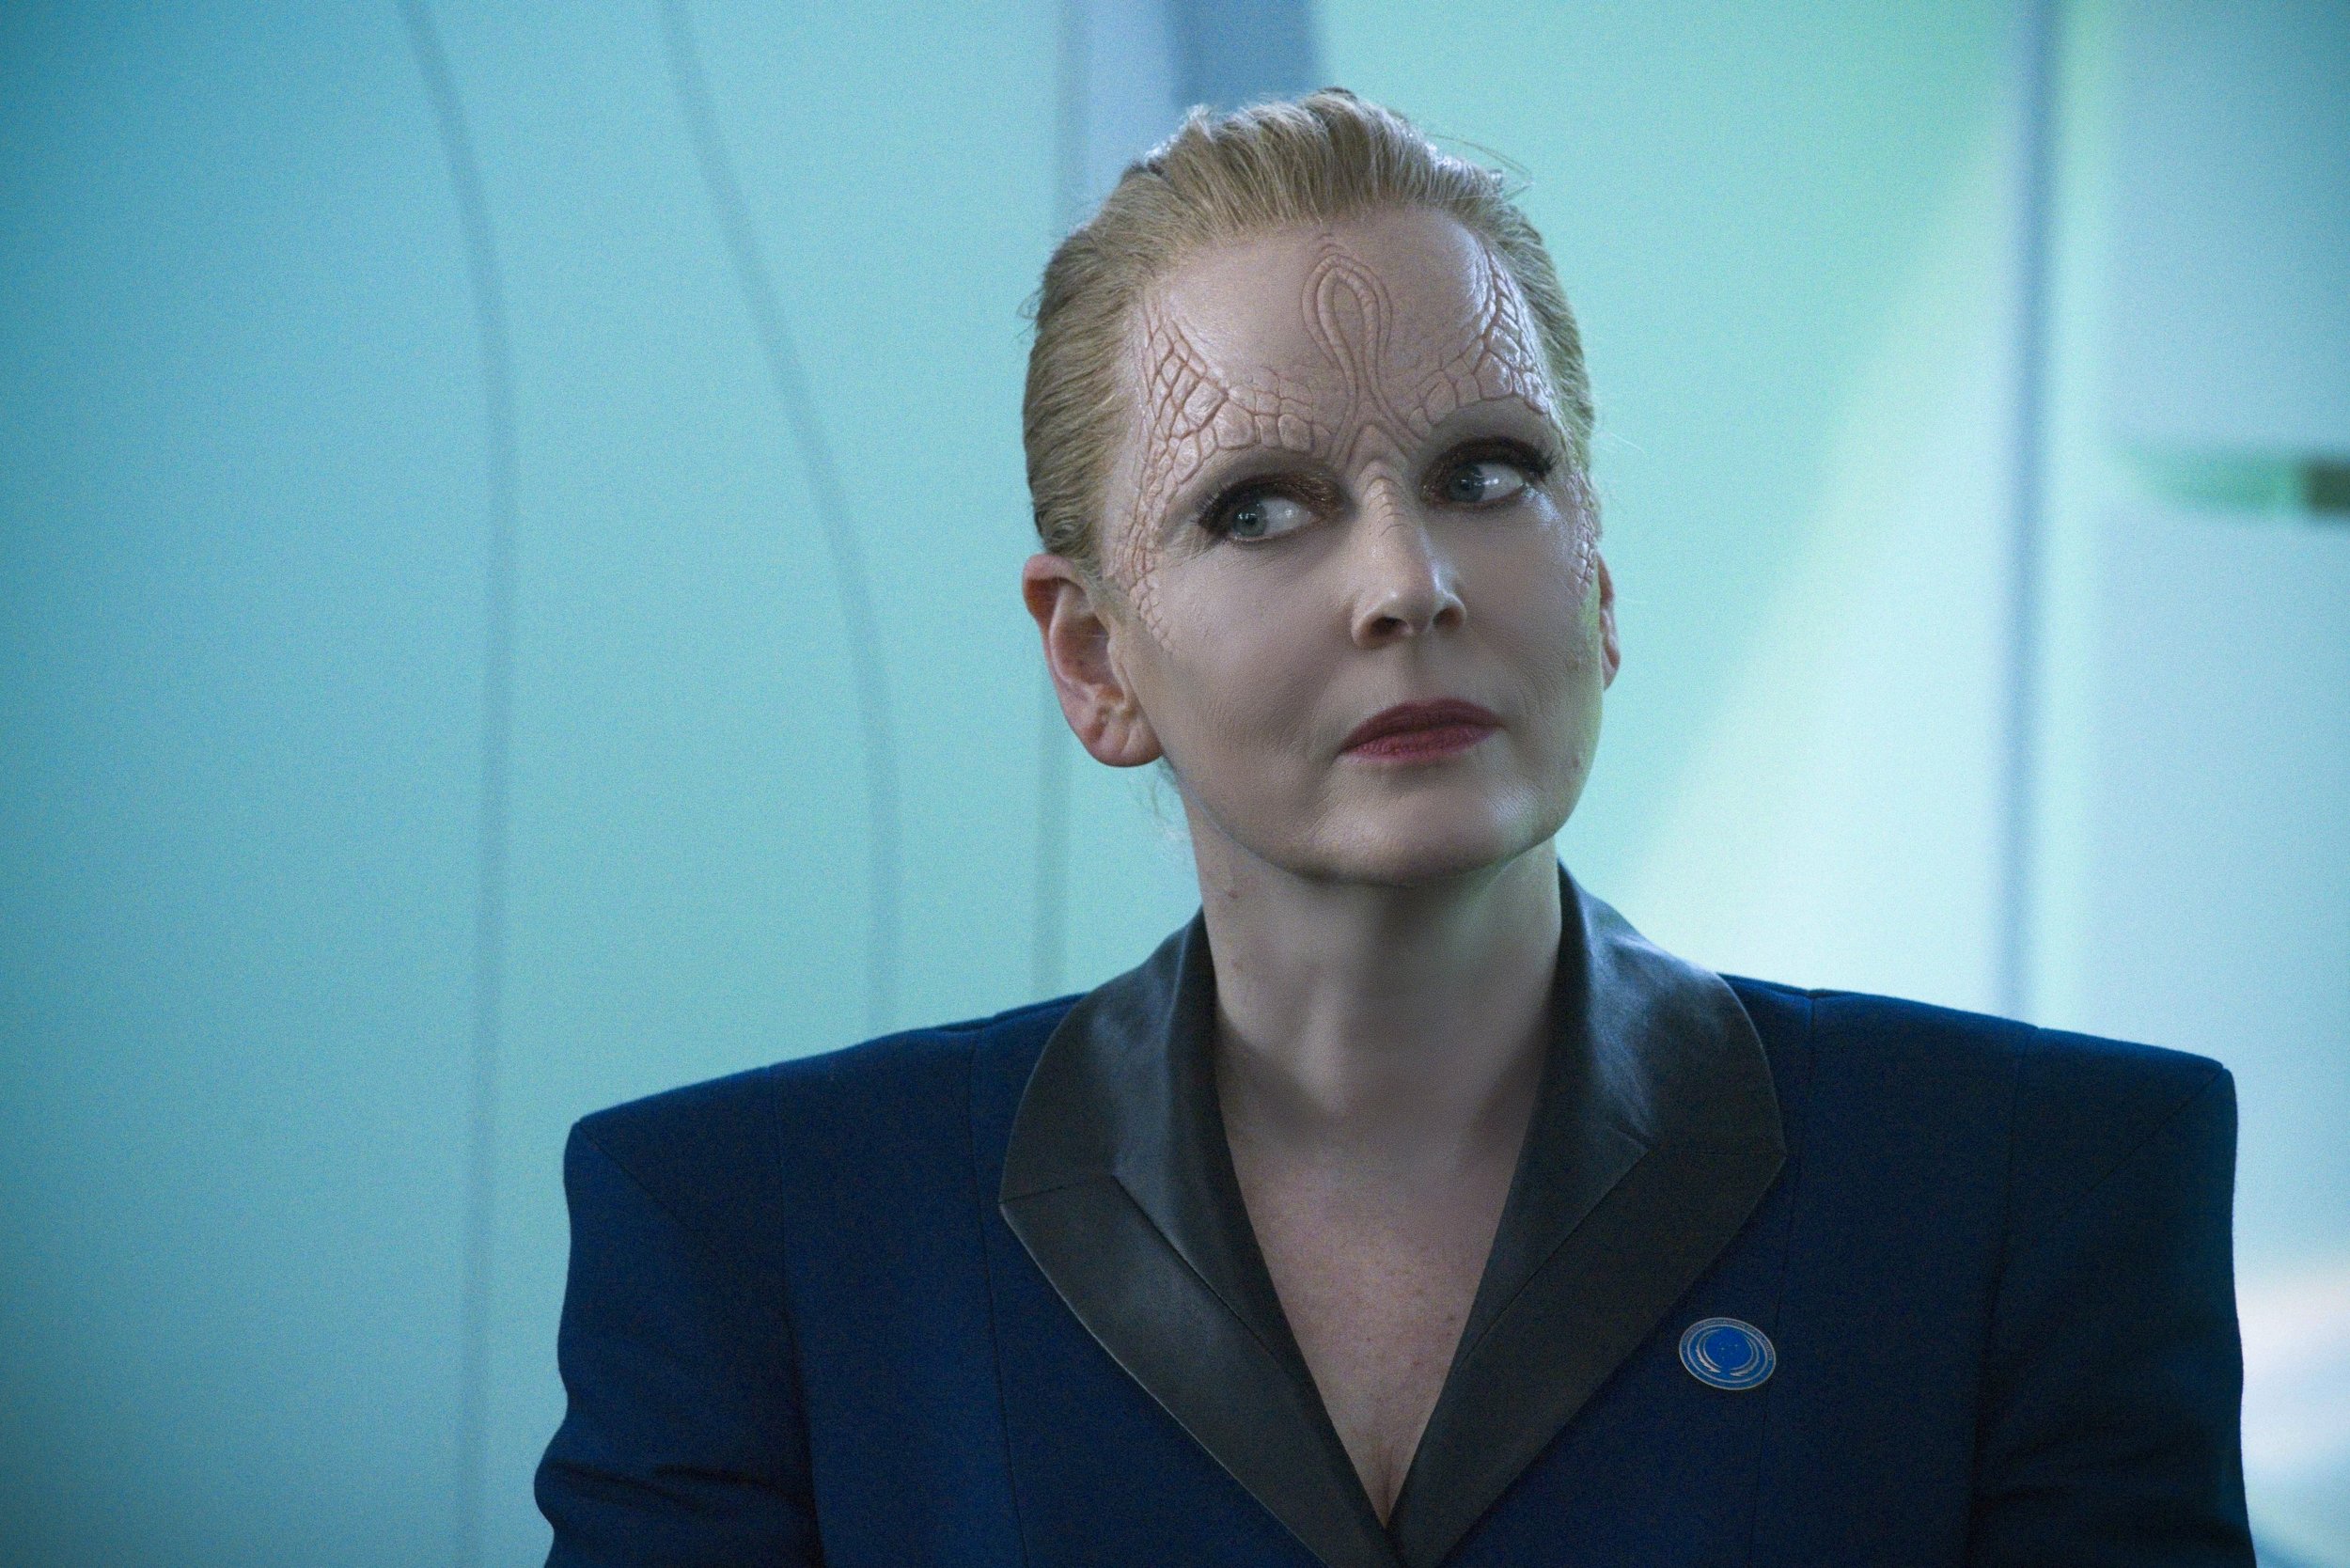   Pictured: Chelah Horsdal as President Laira Rillak of the Paramount+ original series STAR TREK: DISCOVERY. Photo Cr: Michael Gibson/Paramount+ © 2021 CBS Interactive. All Rights Reserved.  